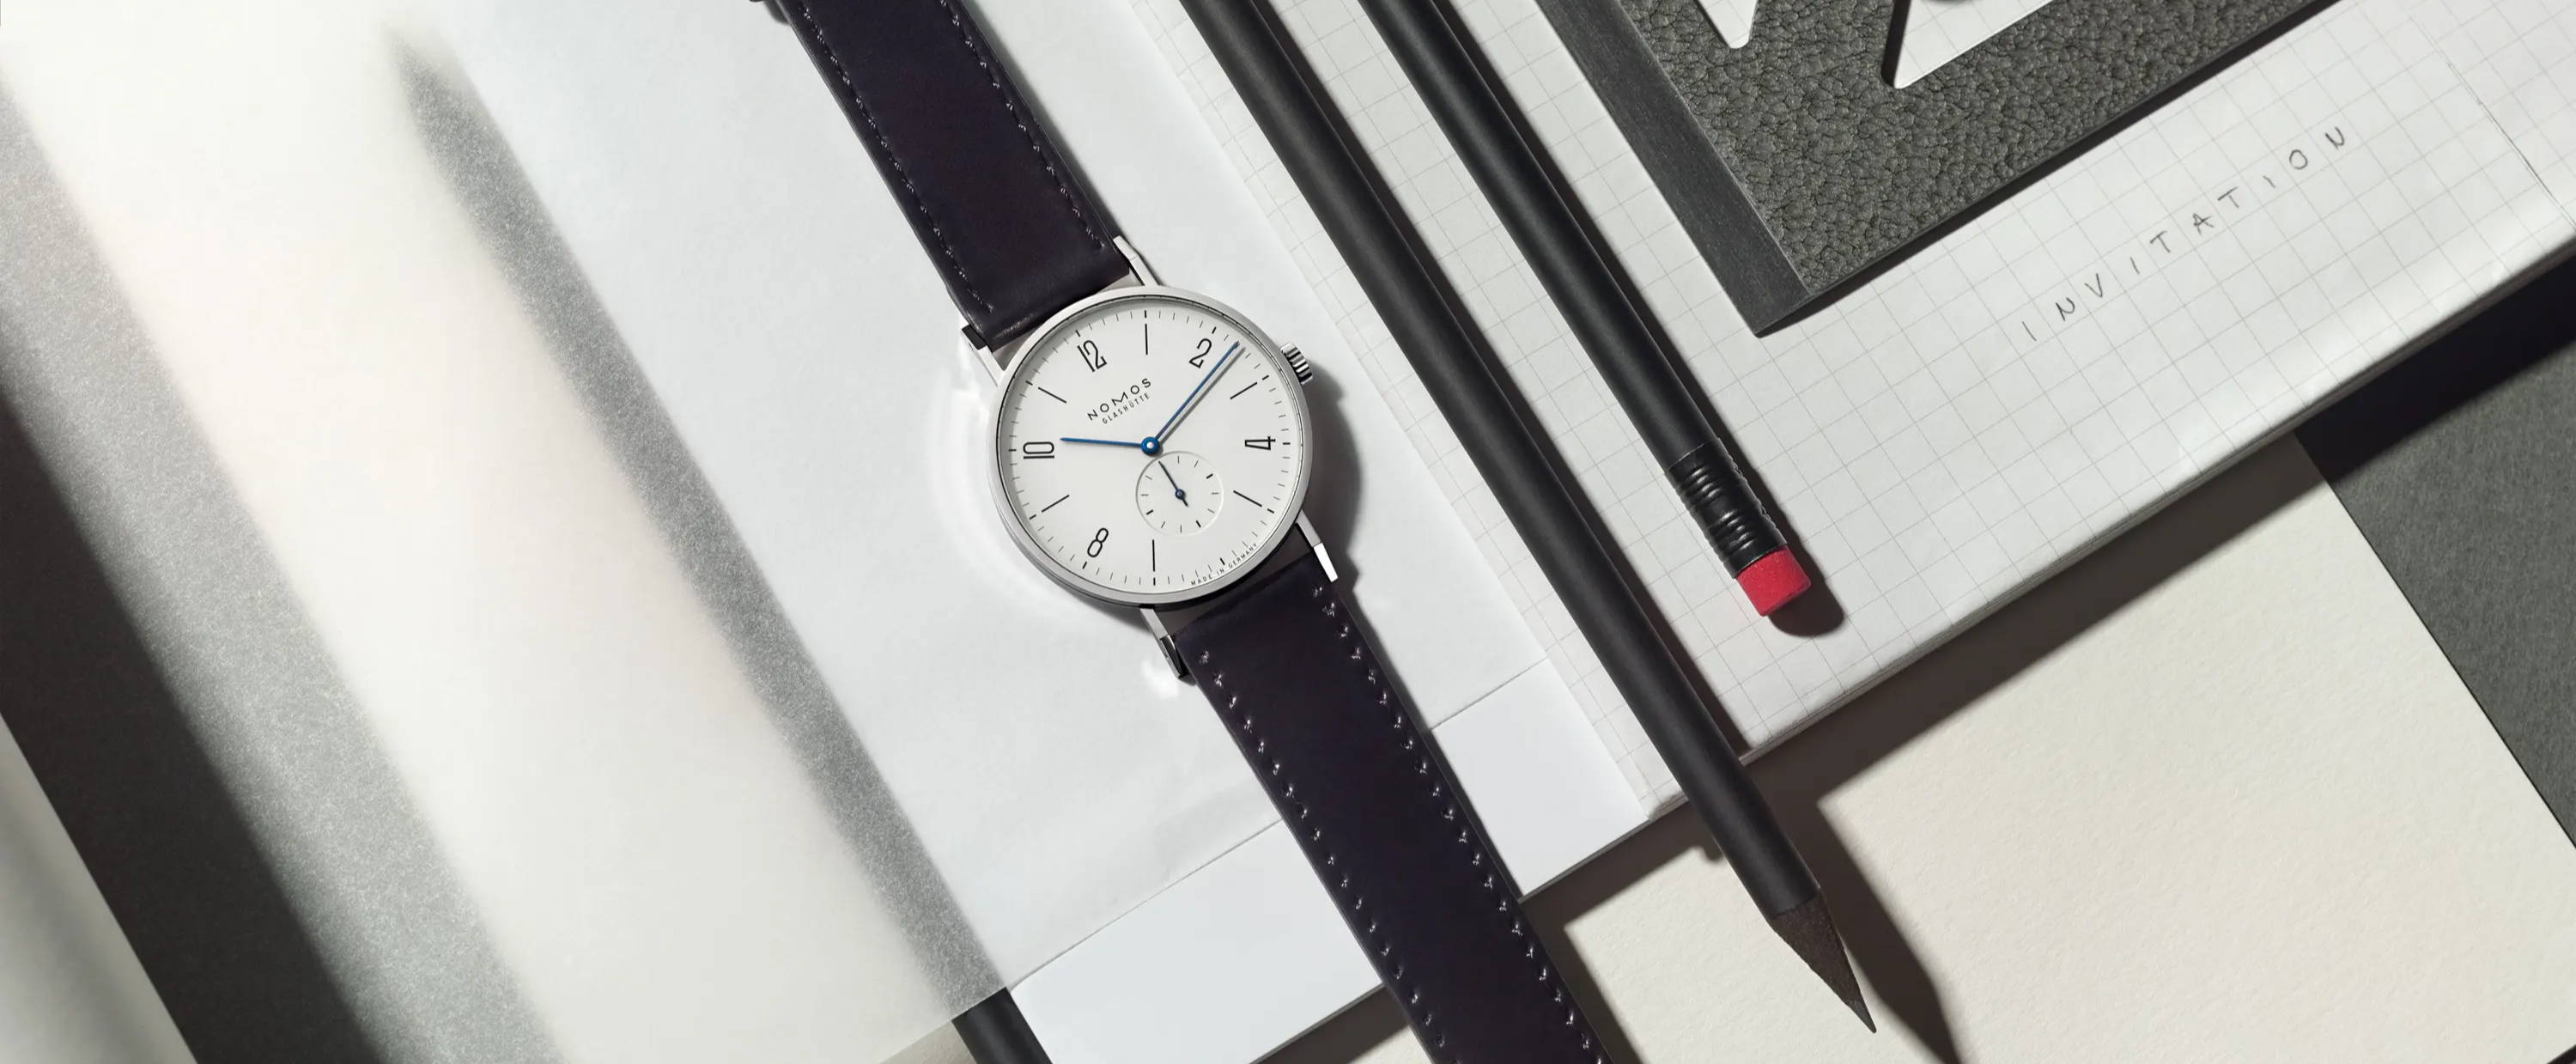 Nomos Glashutte Watch with Dark Leather Strap and White Dial on Notebook Next to Pencils